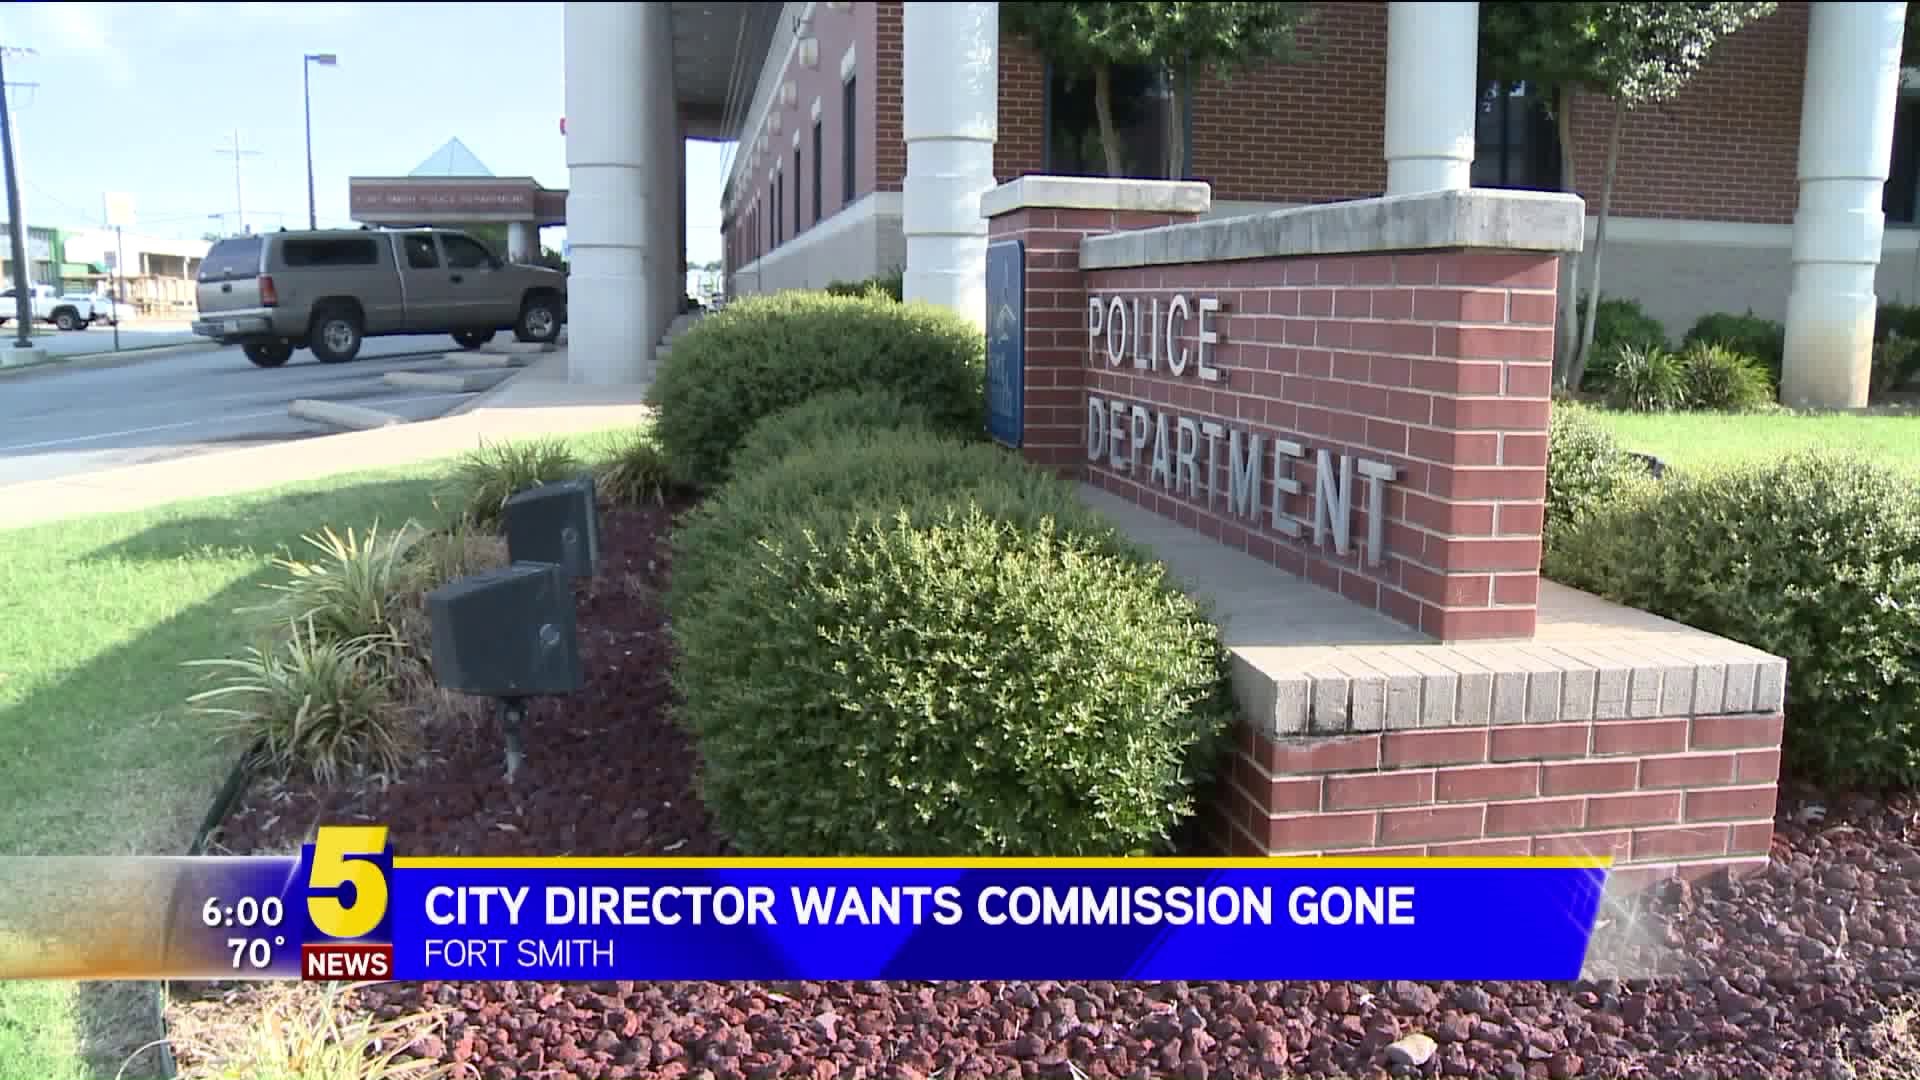 City Director Wants Commission Gone